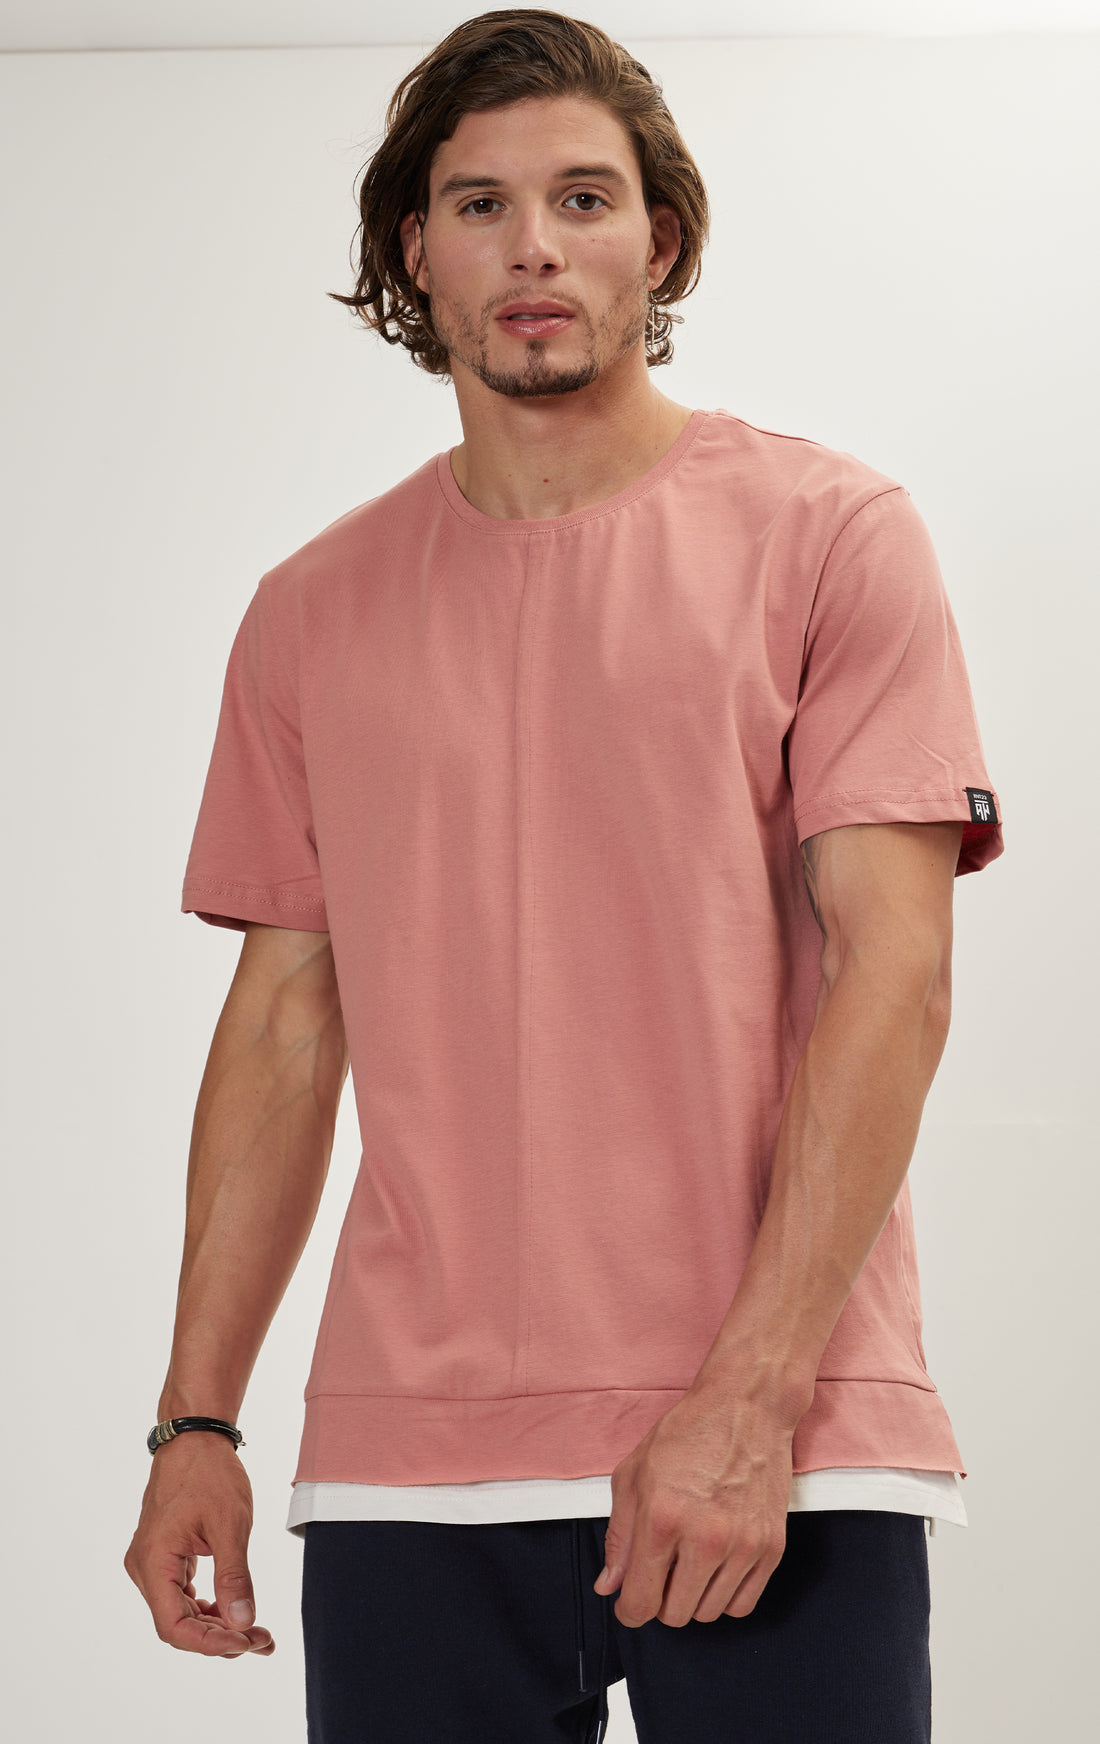 N° 8135 RT PURE COTTON SCOOP NECK TEE - ROSE